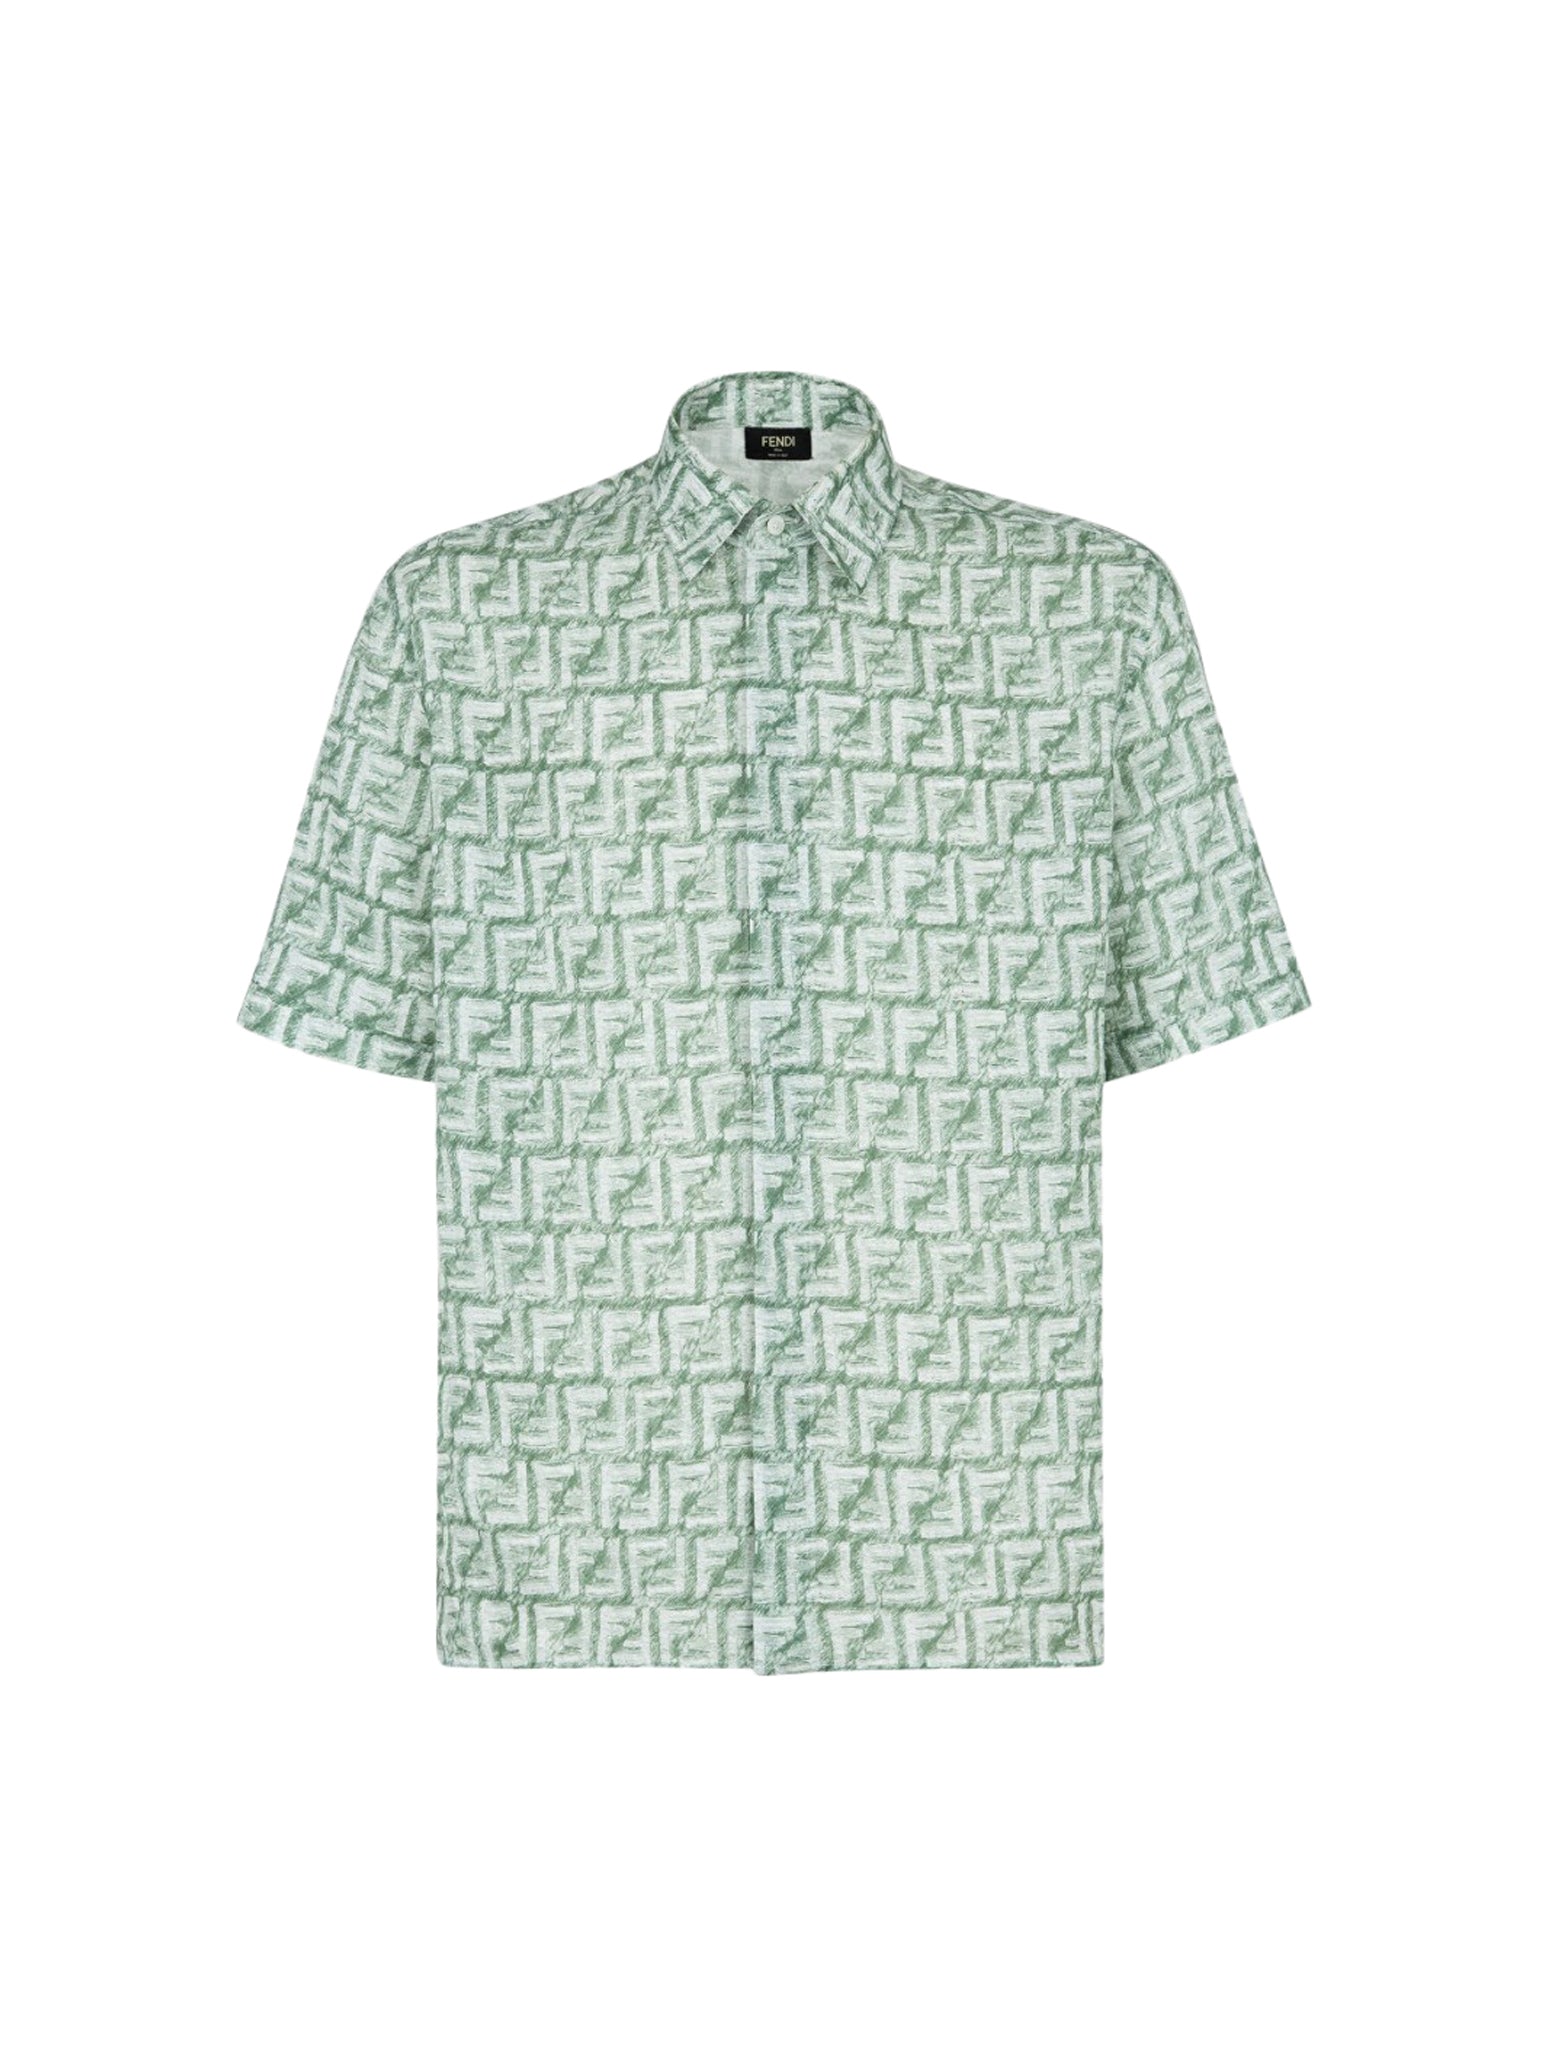 Green linen shirt with label